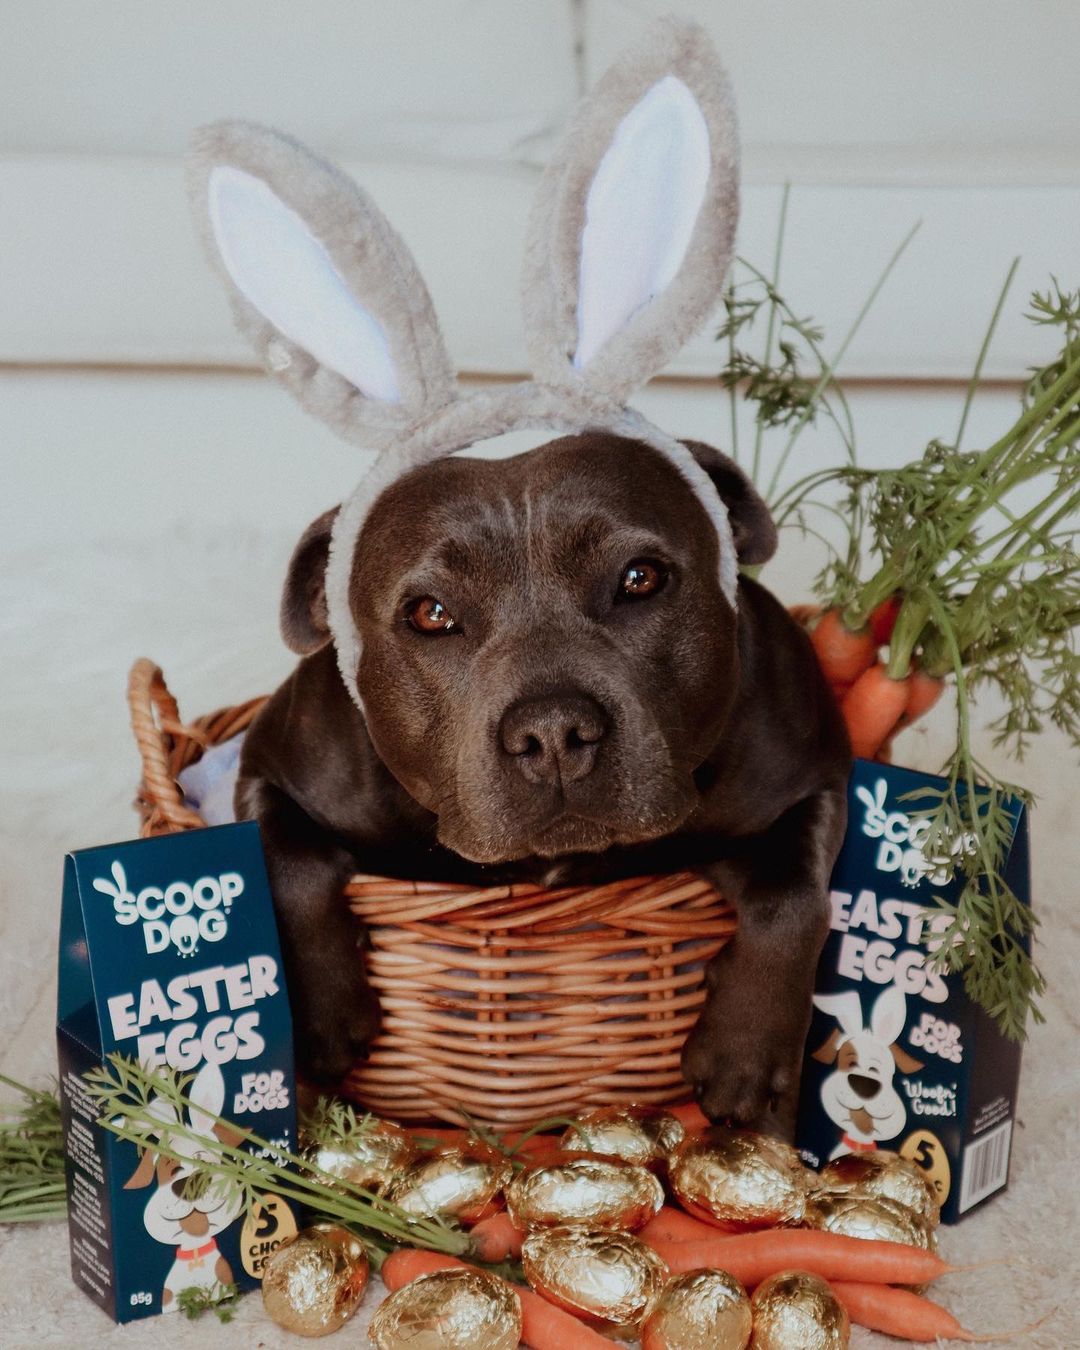 Easter Eggs For Dogs - Scoop Dog  